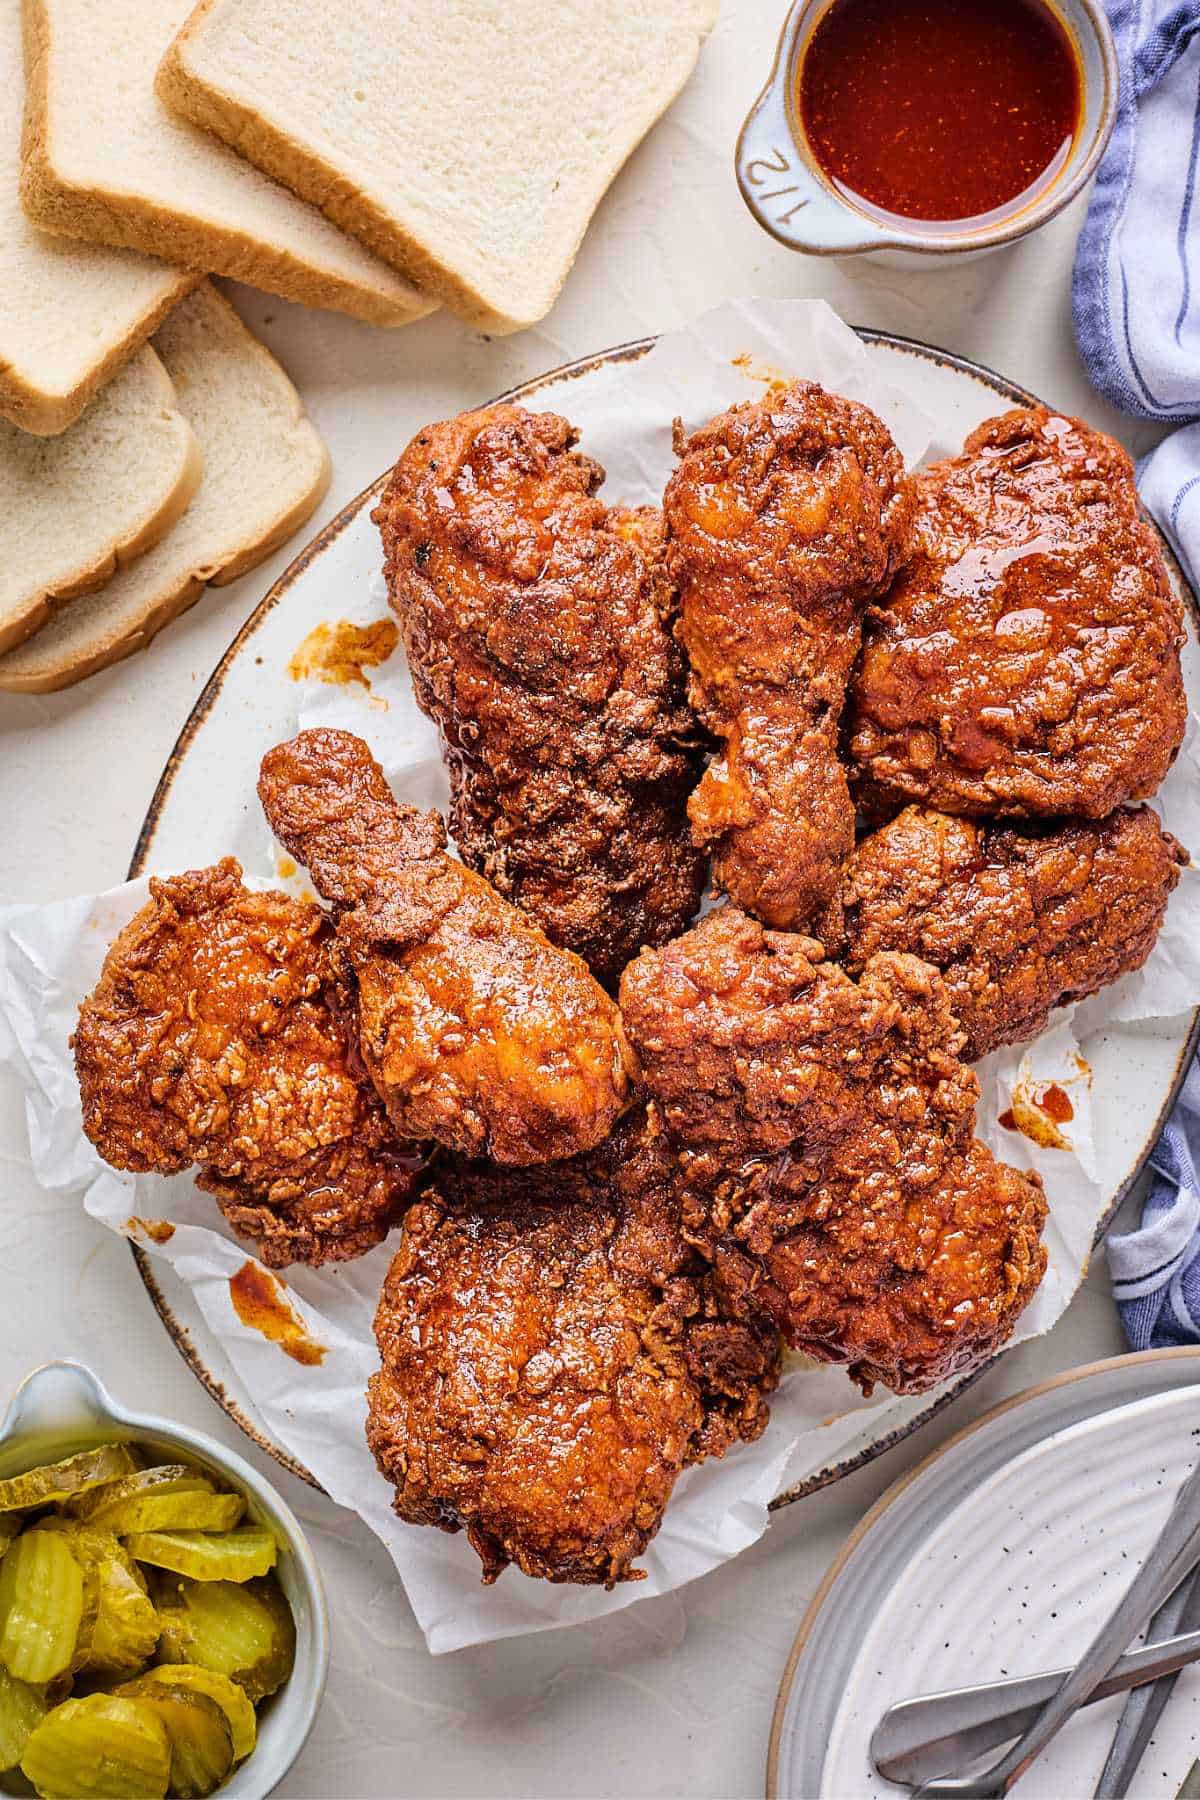 An overhead shot of Hot Chicken on a platter with slices of white bread and a pitcher of sauce to the side.